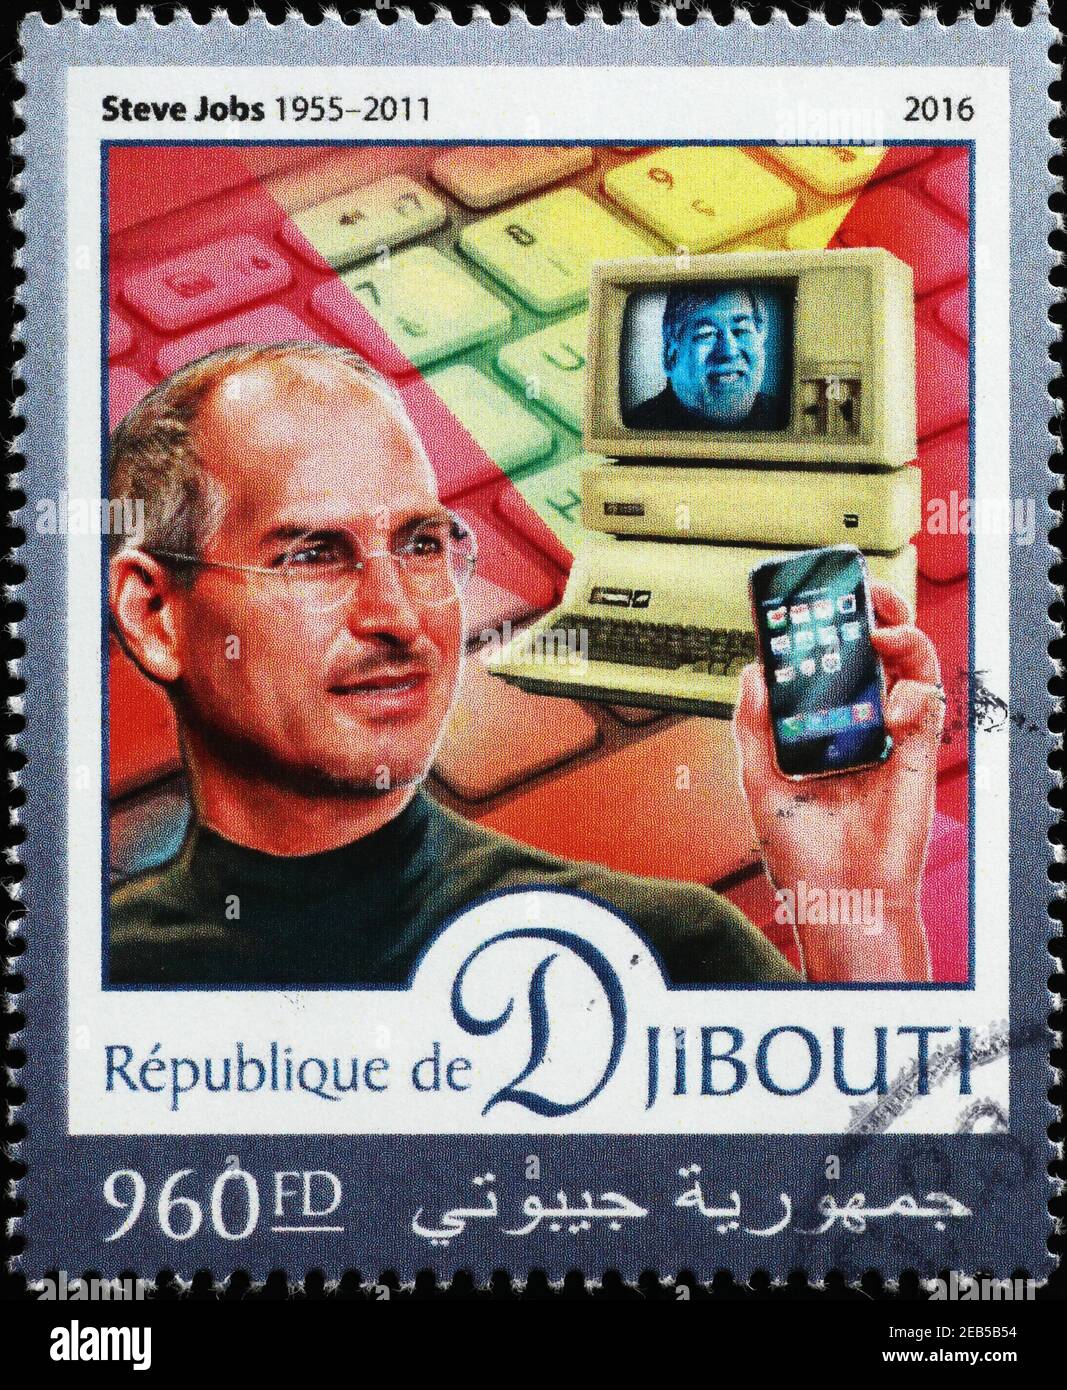 Steve Jobs with an I-Phone on postage stamp Stock Photo